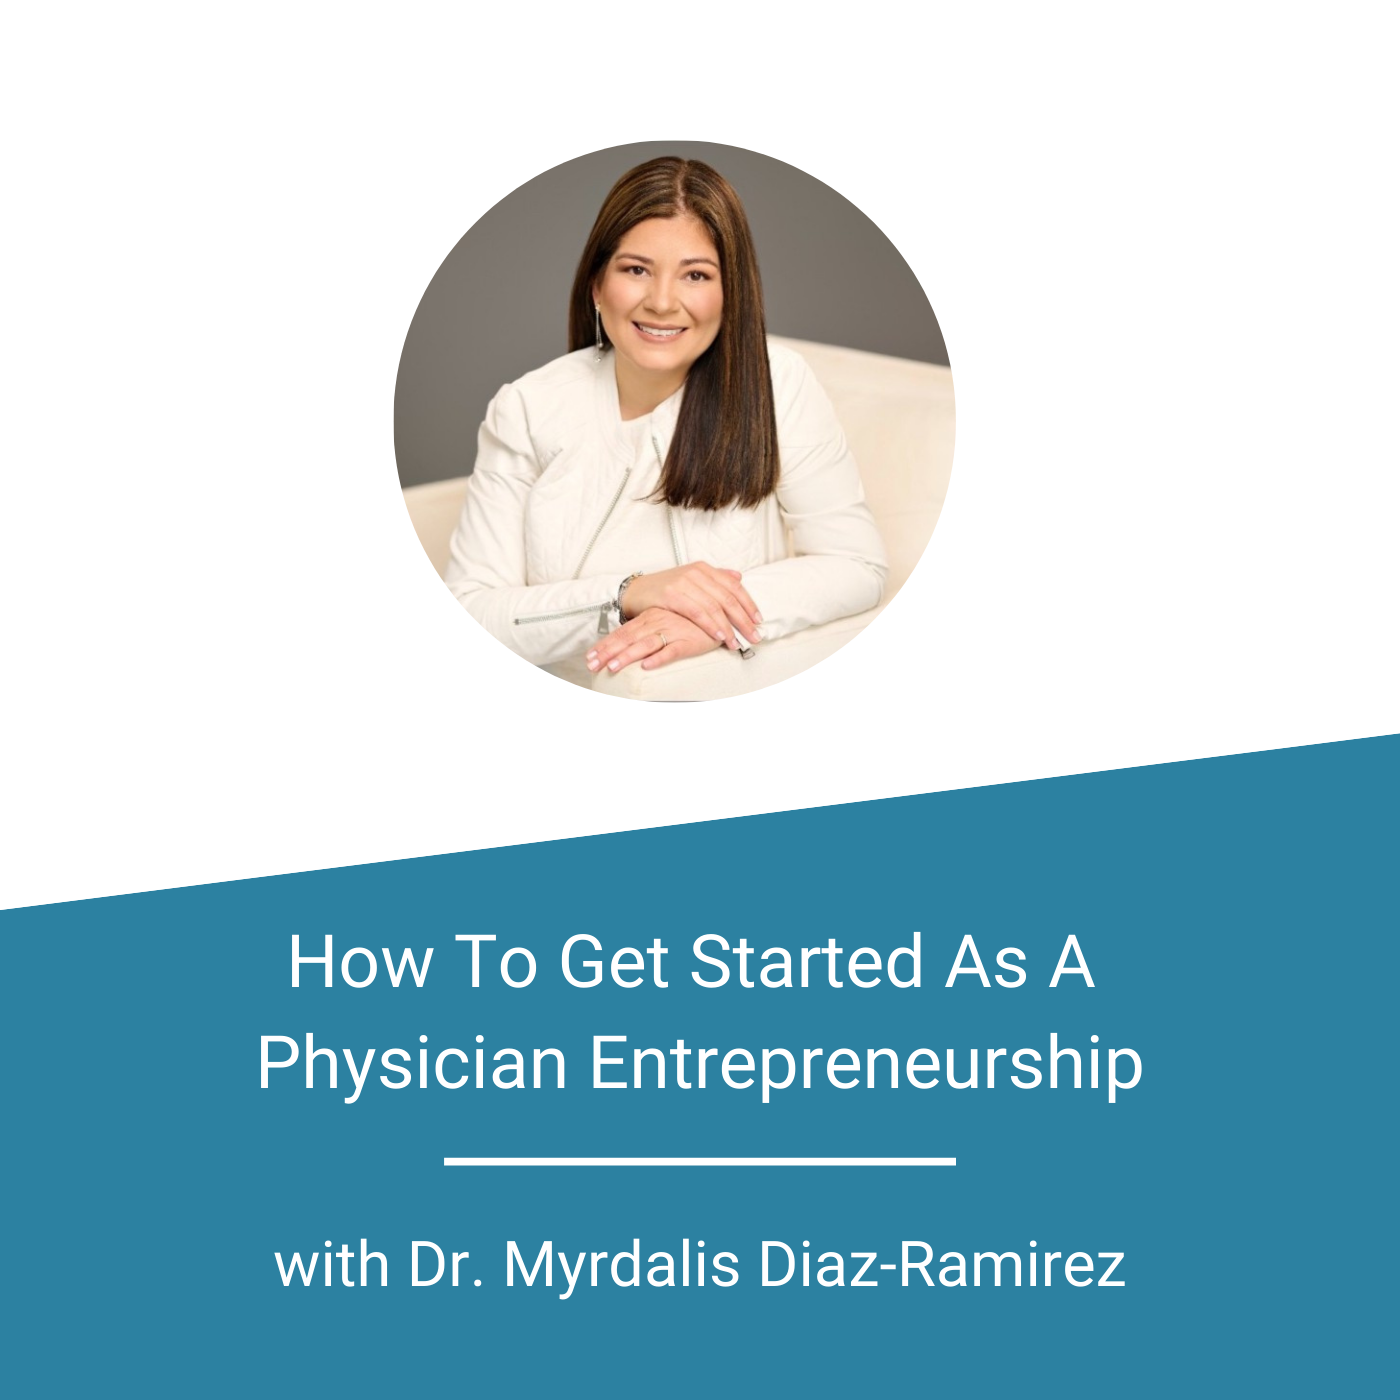 Featured Image - How To Get Started As A Physician Entrepreneurship